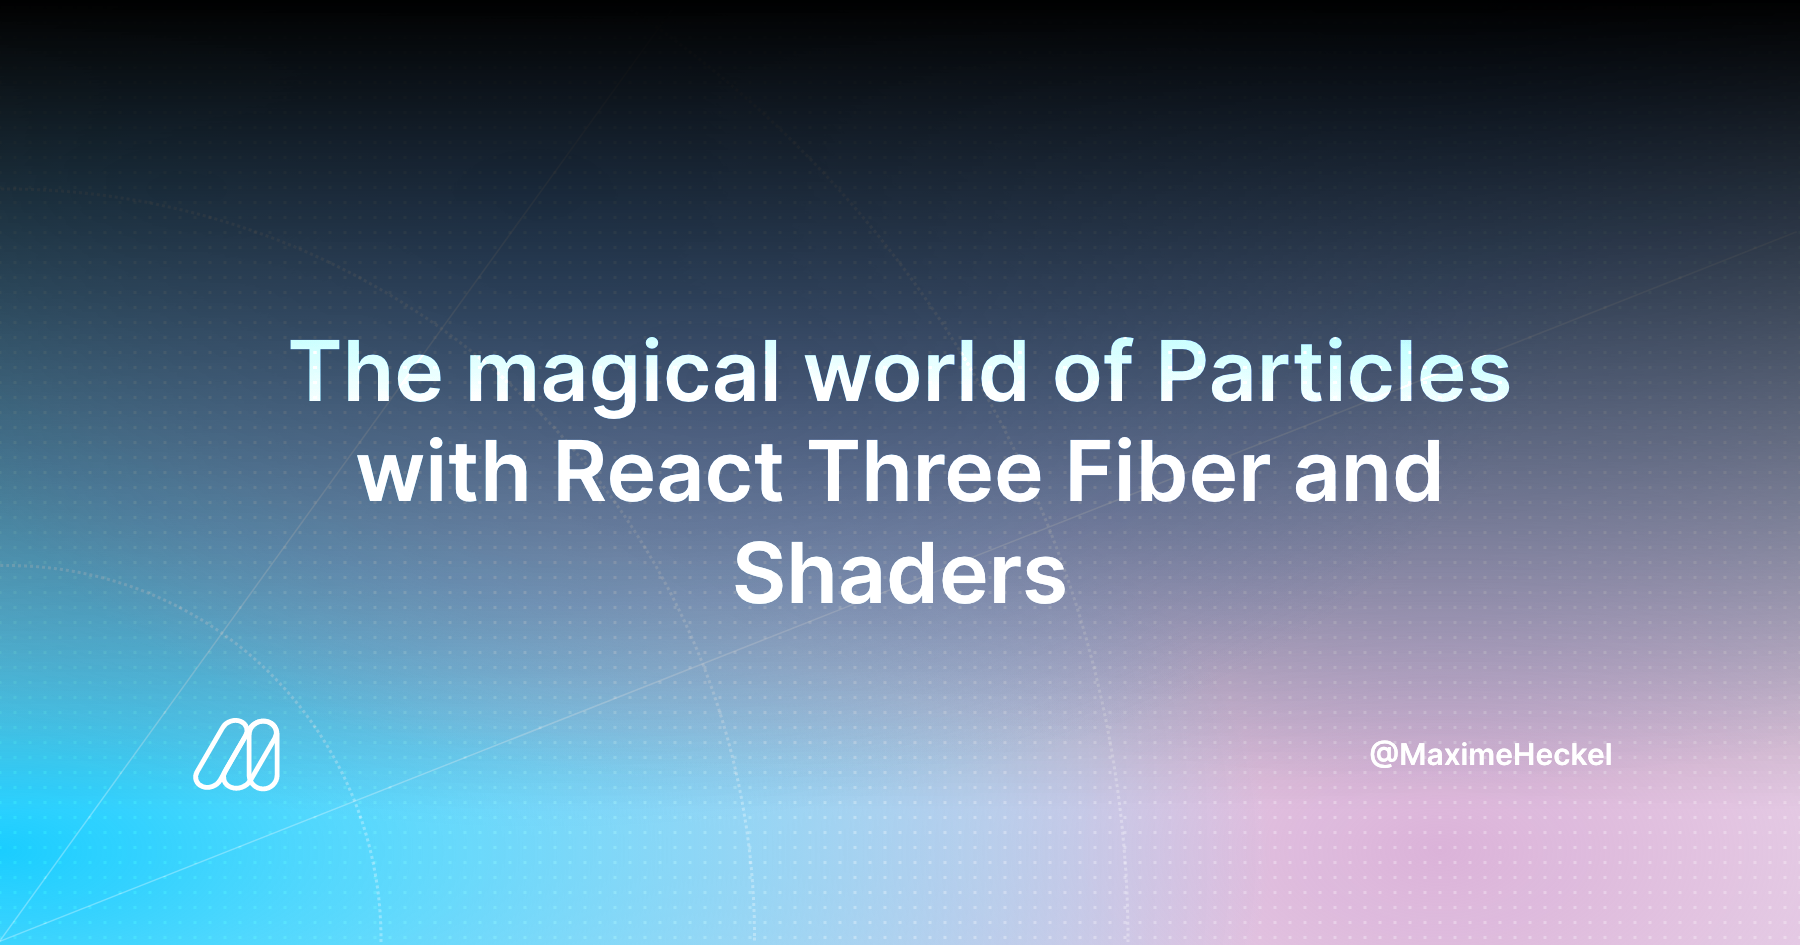 The magical world of Particles with React Three Fiber and Shaders - Maxime Heckel's Blog